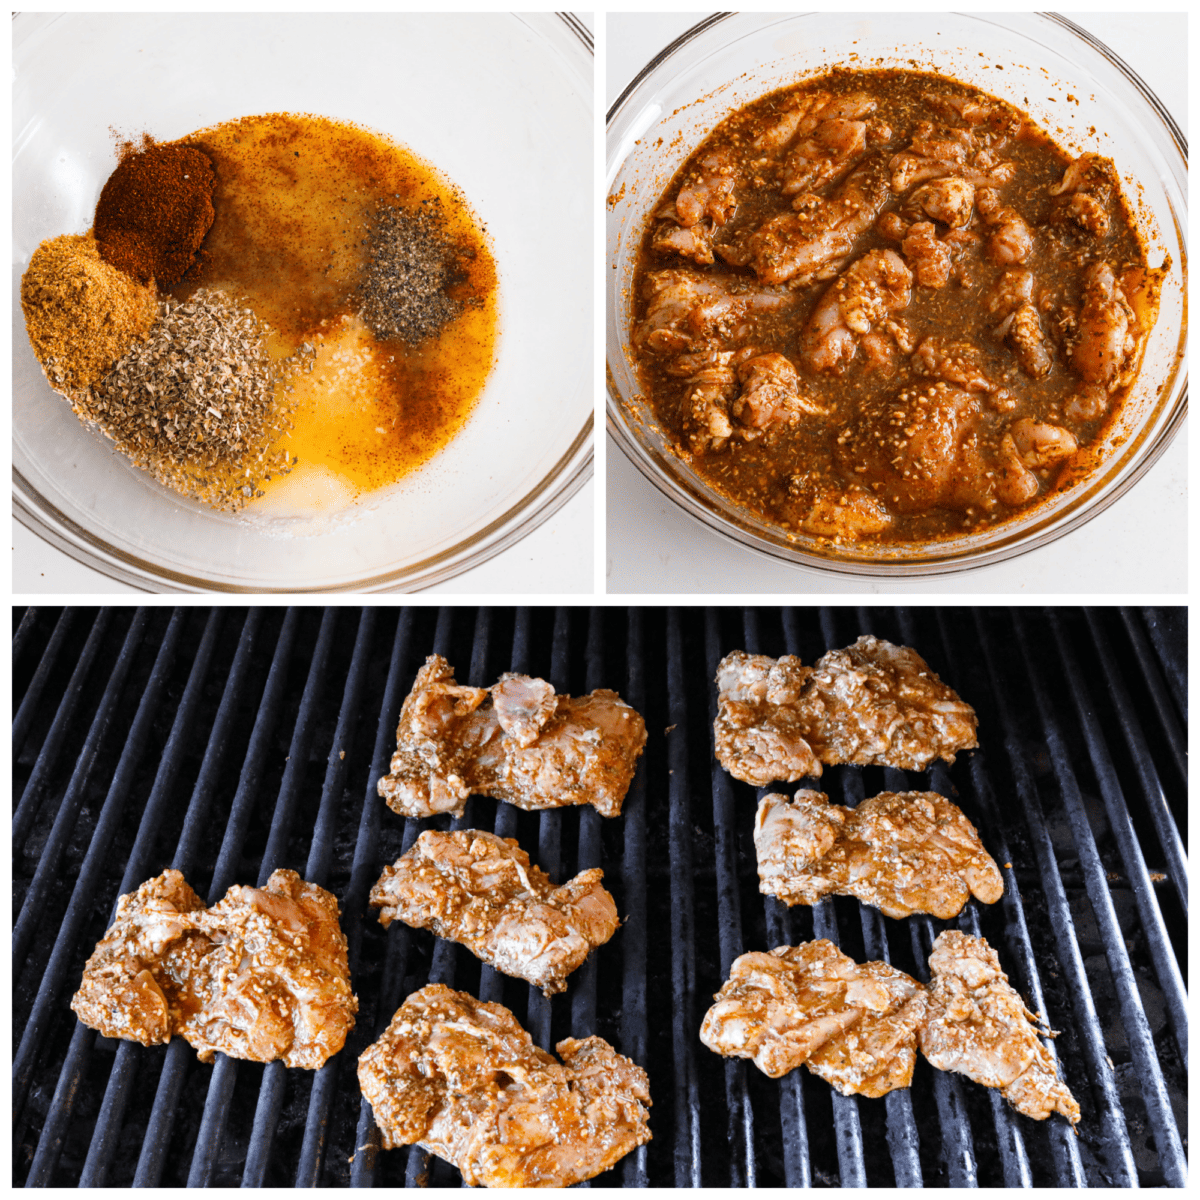 3-photo collage of pollo asado being marinated and grilled.